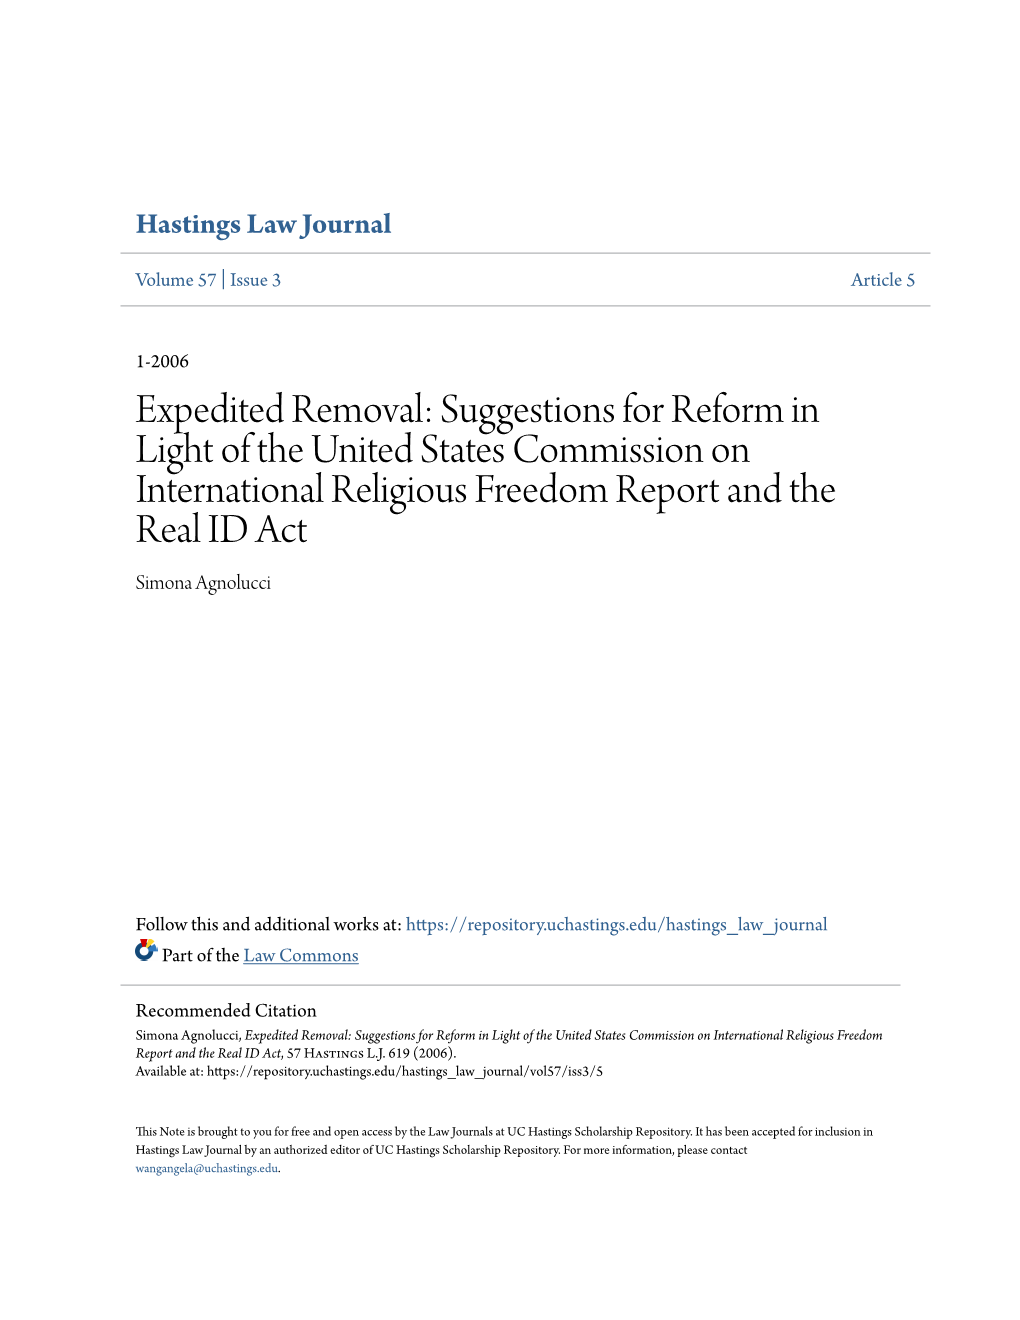 Expedited Removal: Suggestions for Reform in Light of the United States Commission on International Religious Freedom Report and the Real ID Act Simona Agnolucci